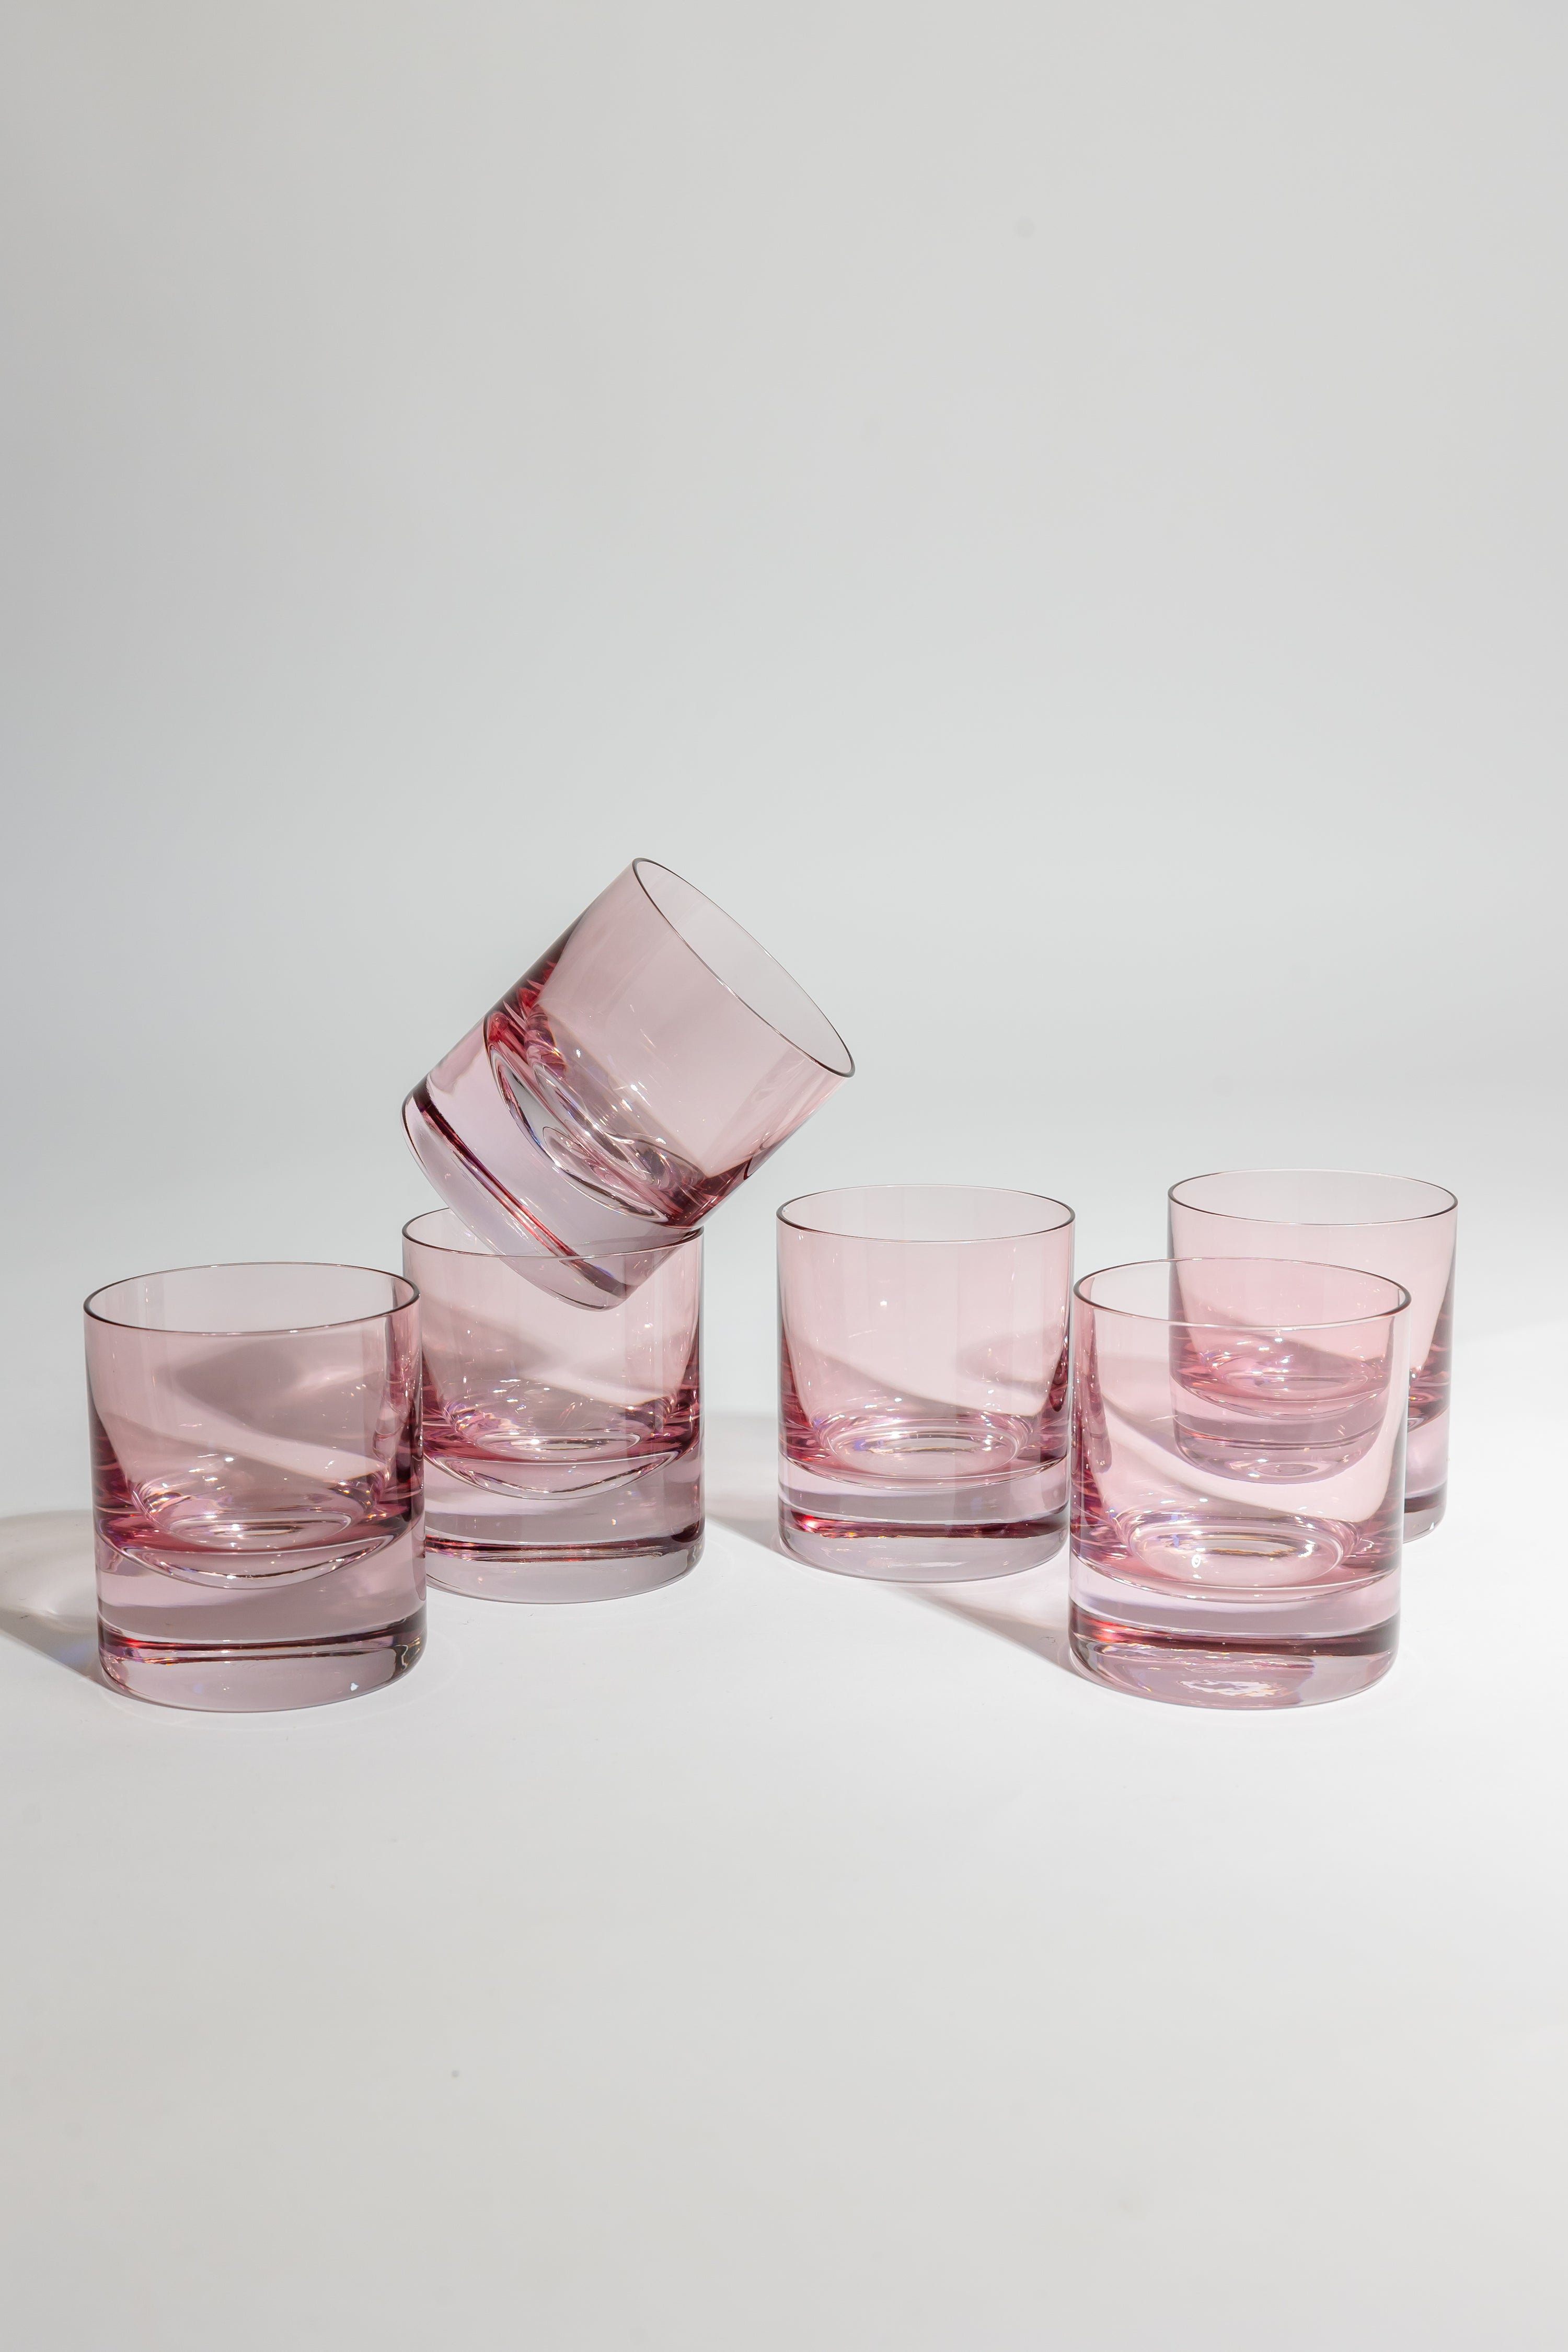 New Limited Edition: Rocks Glasses